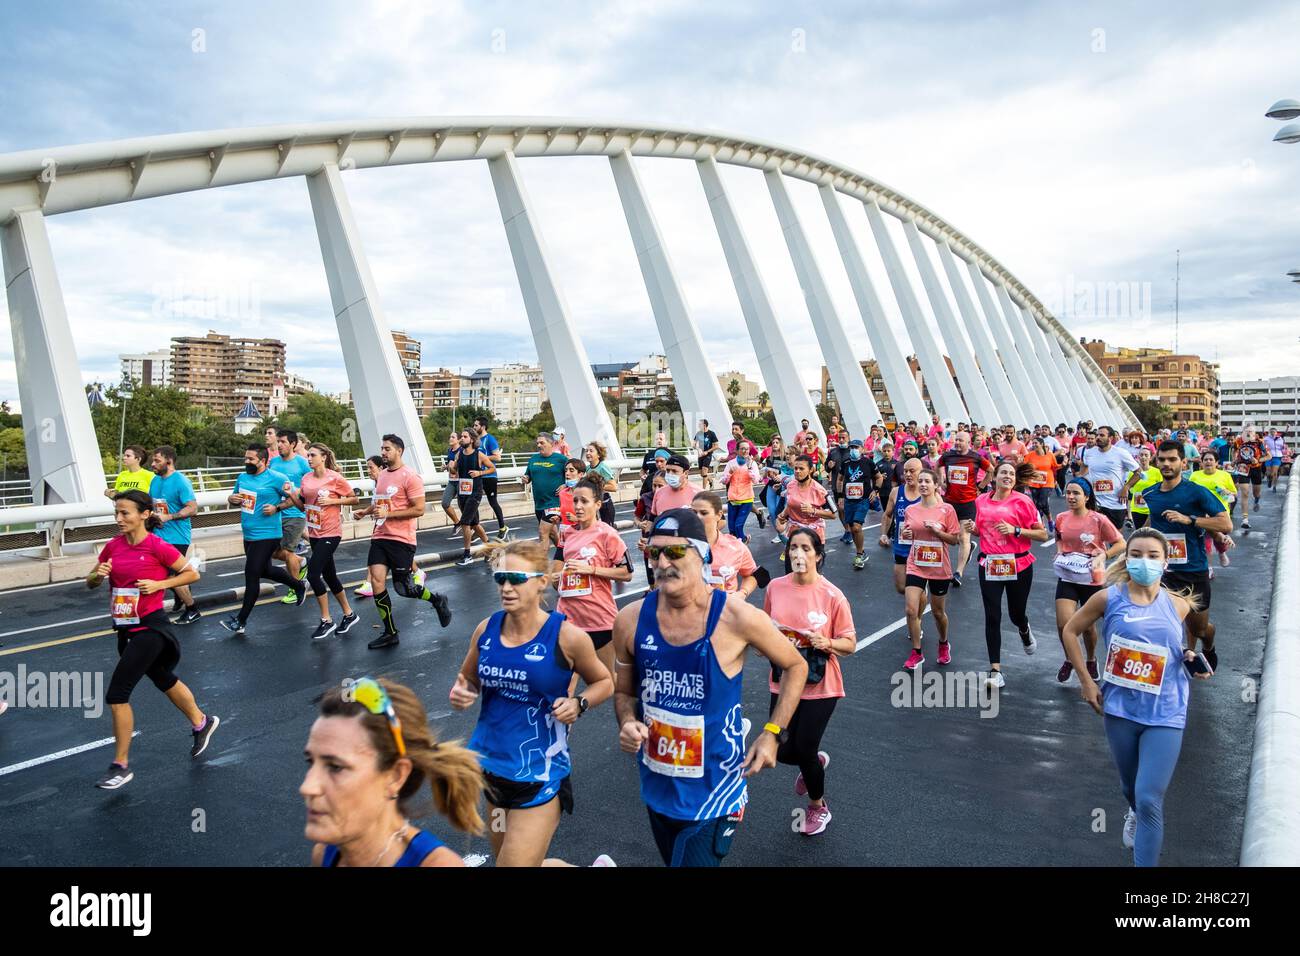 Valencia, Spain; 31th october 2021: Participating athletes running in a popular race Stock Photo